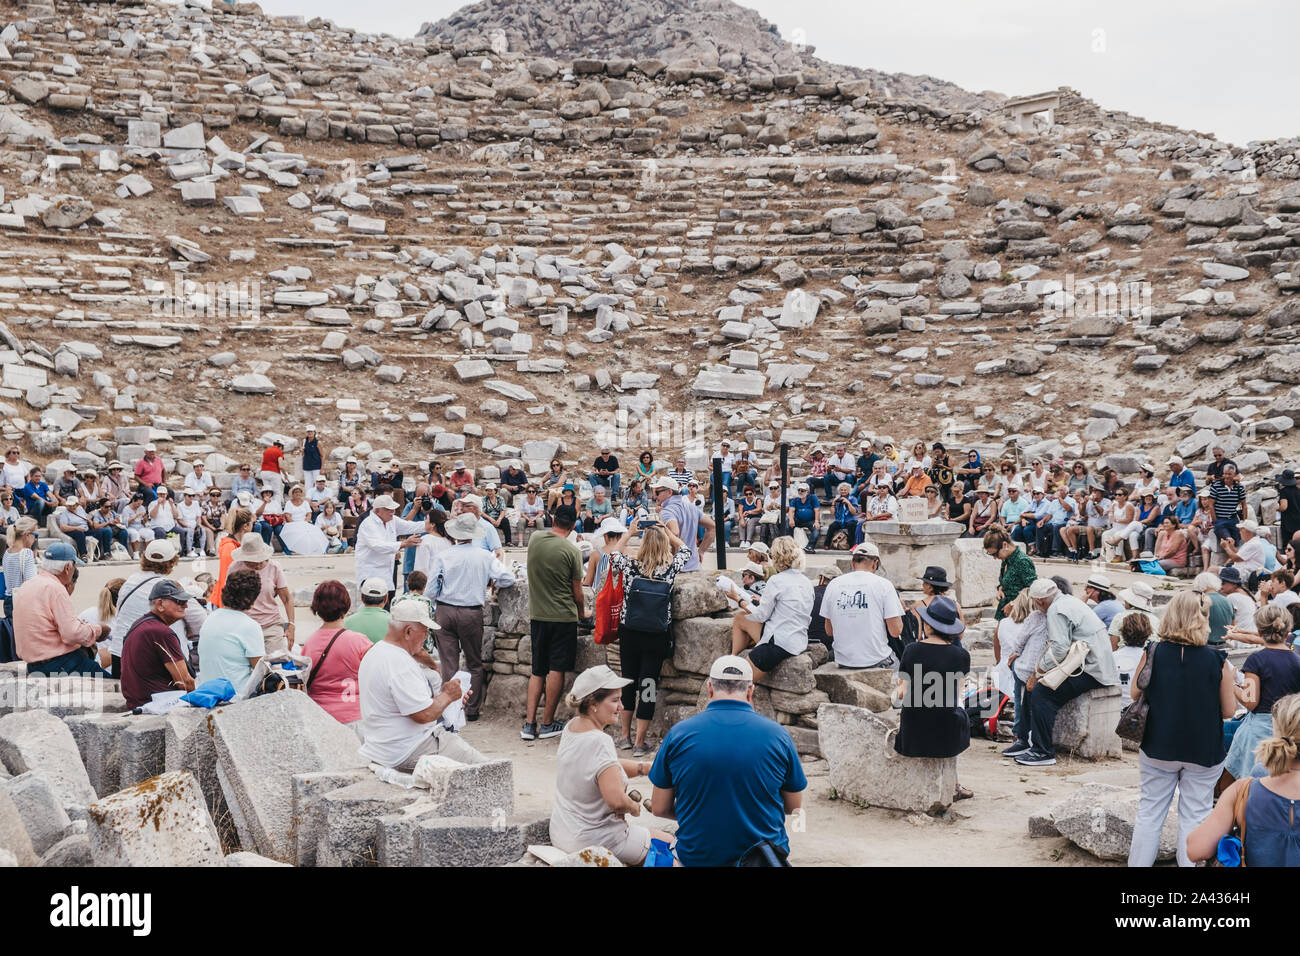 Delos, Greece - September 20, 2019: Large number of tourists watching performance at the ancient theatre on the Greek island of Delos, an archaeologic Stock Photo